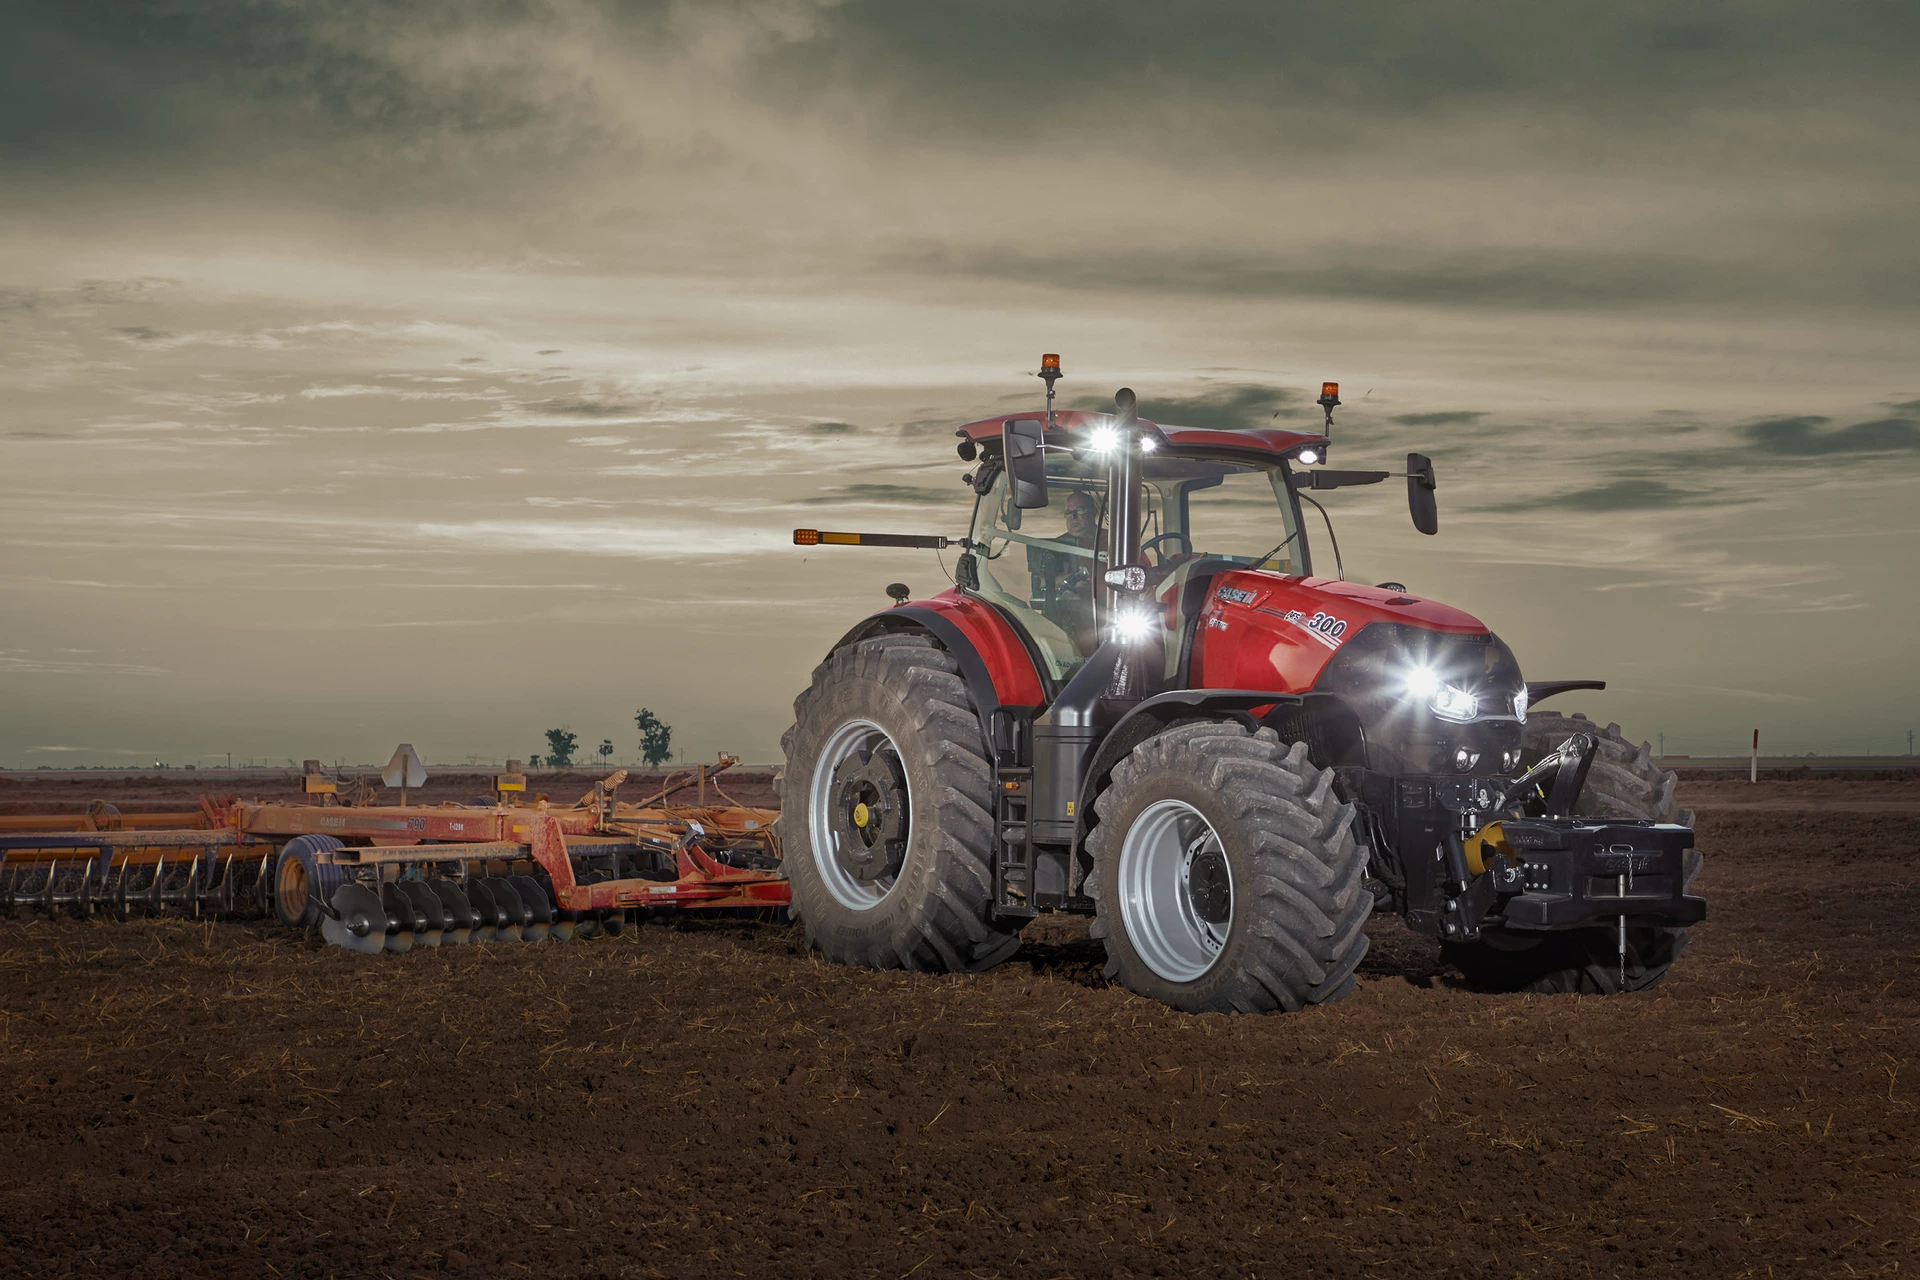 A Case IH AFS Connect Optum tractor